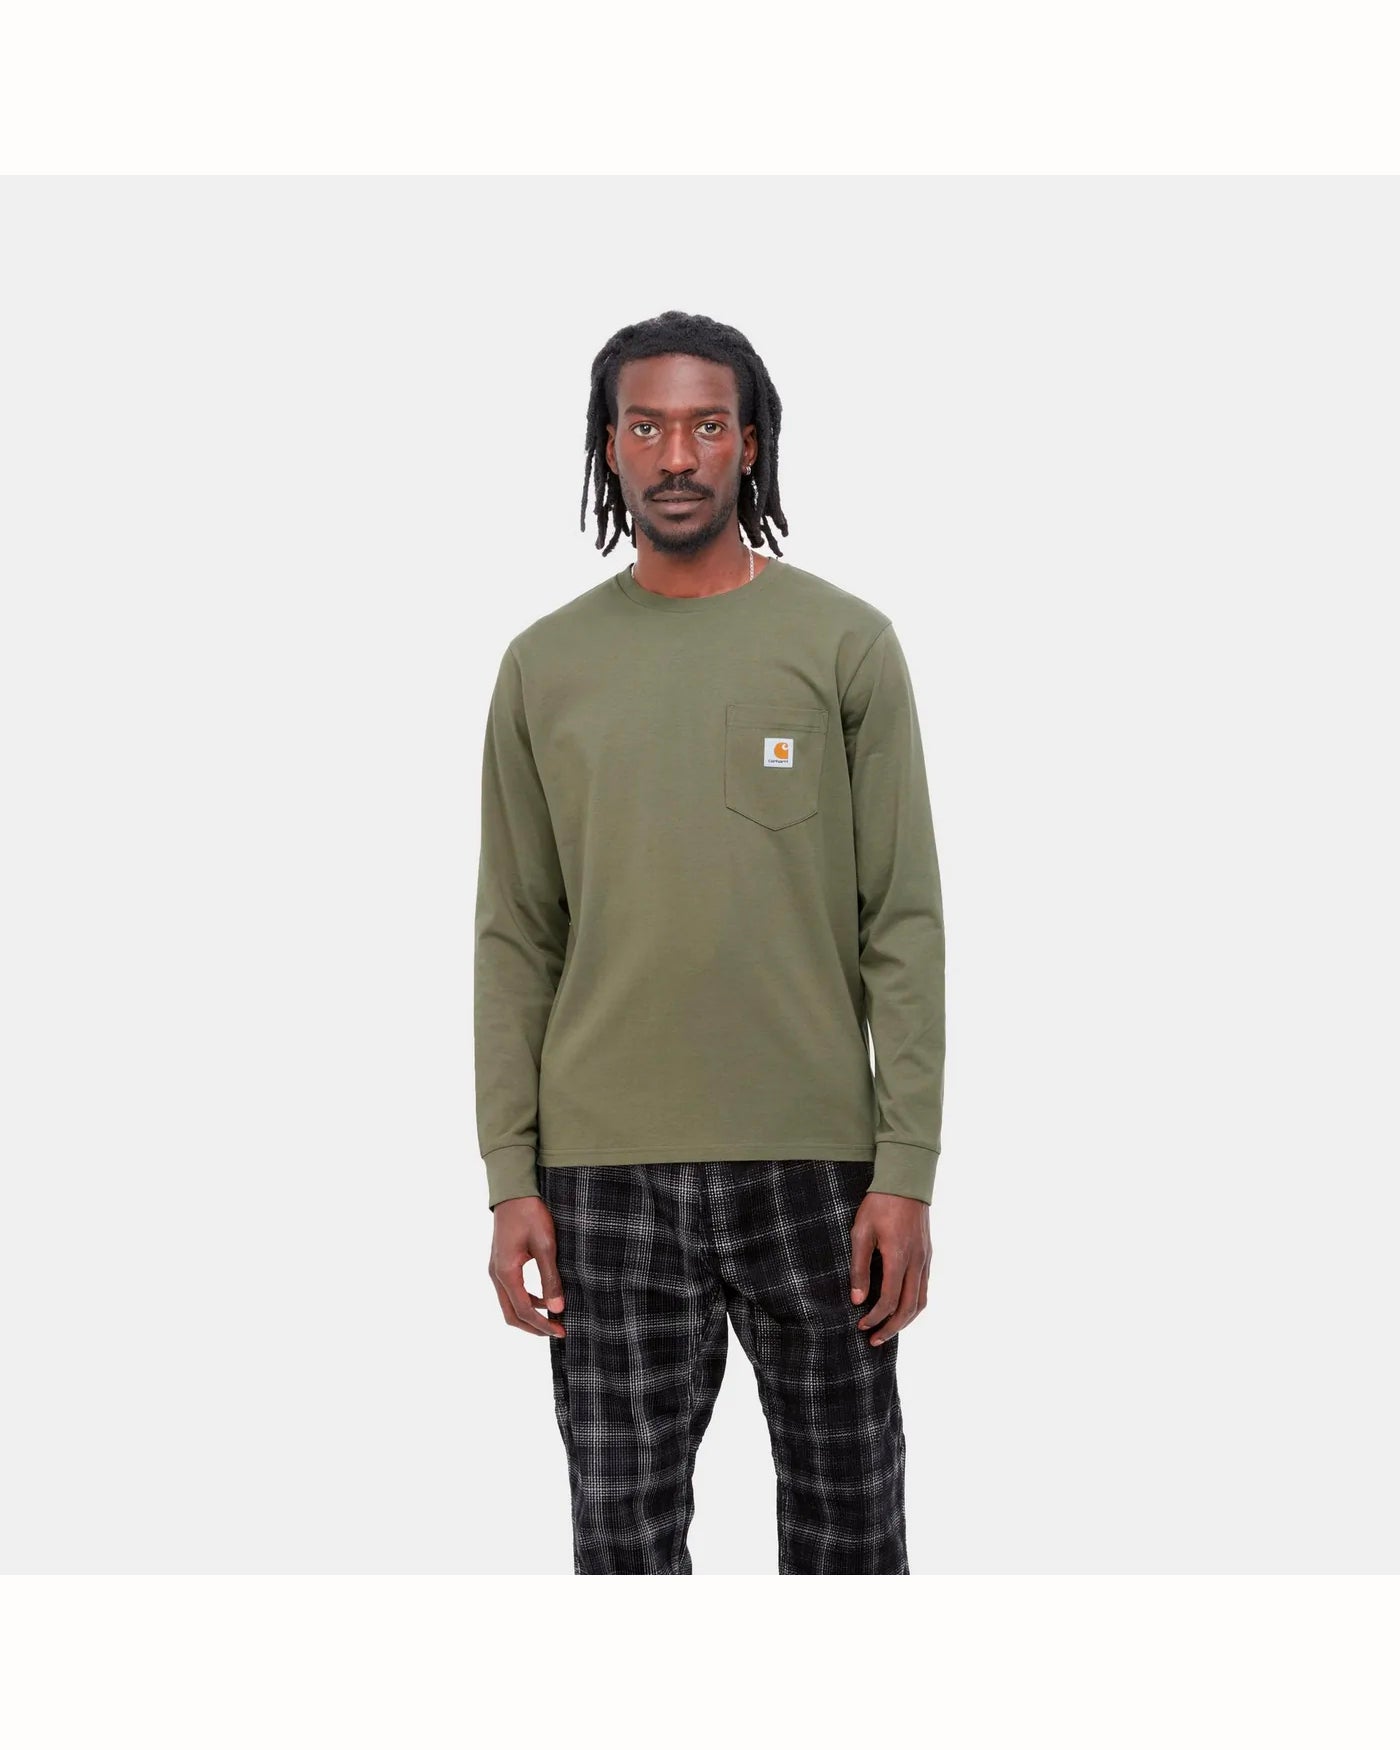 L/S Pocket T-shirt SEAWEED
The Long Sleeve Pocket T-Shirt is constructed from cotton jersey. It features a single chest pocket, adorned with a woven Carhartt WIP label.


100% Cotton Single Jersey, 190 g/sqm
regular fit
chest pocket
square label

 CARHARTT WIP